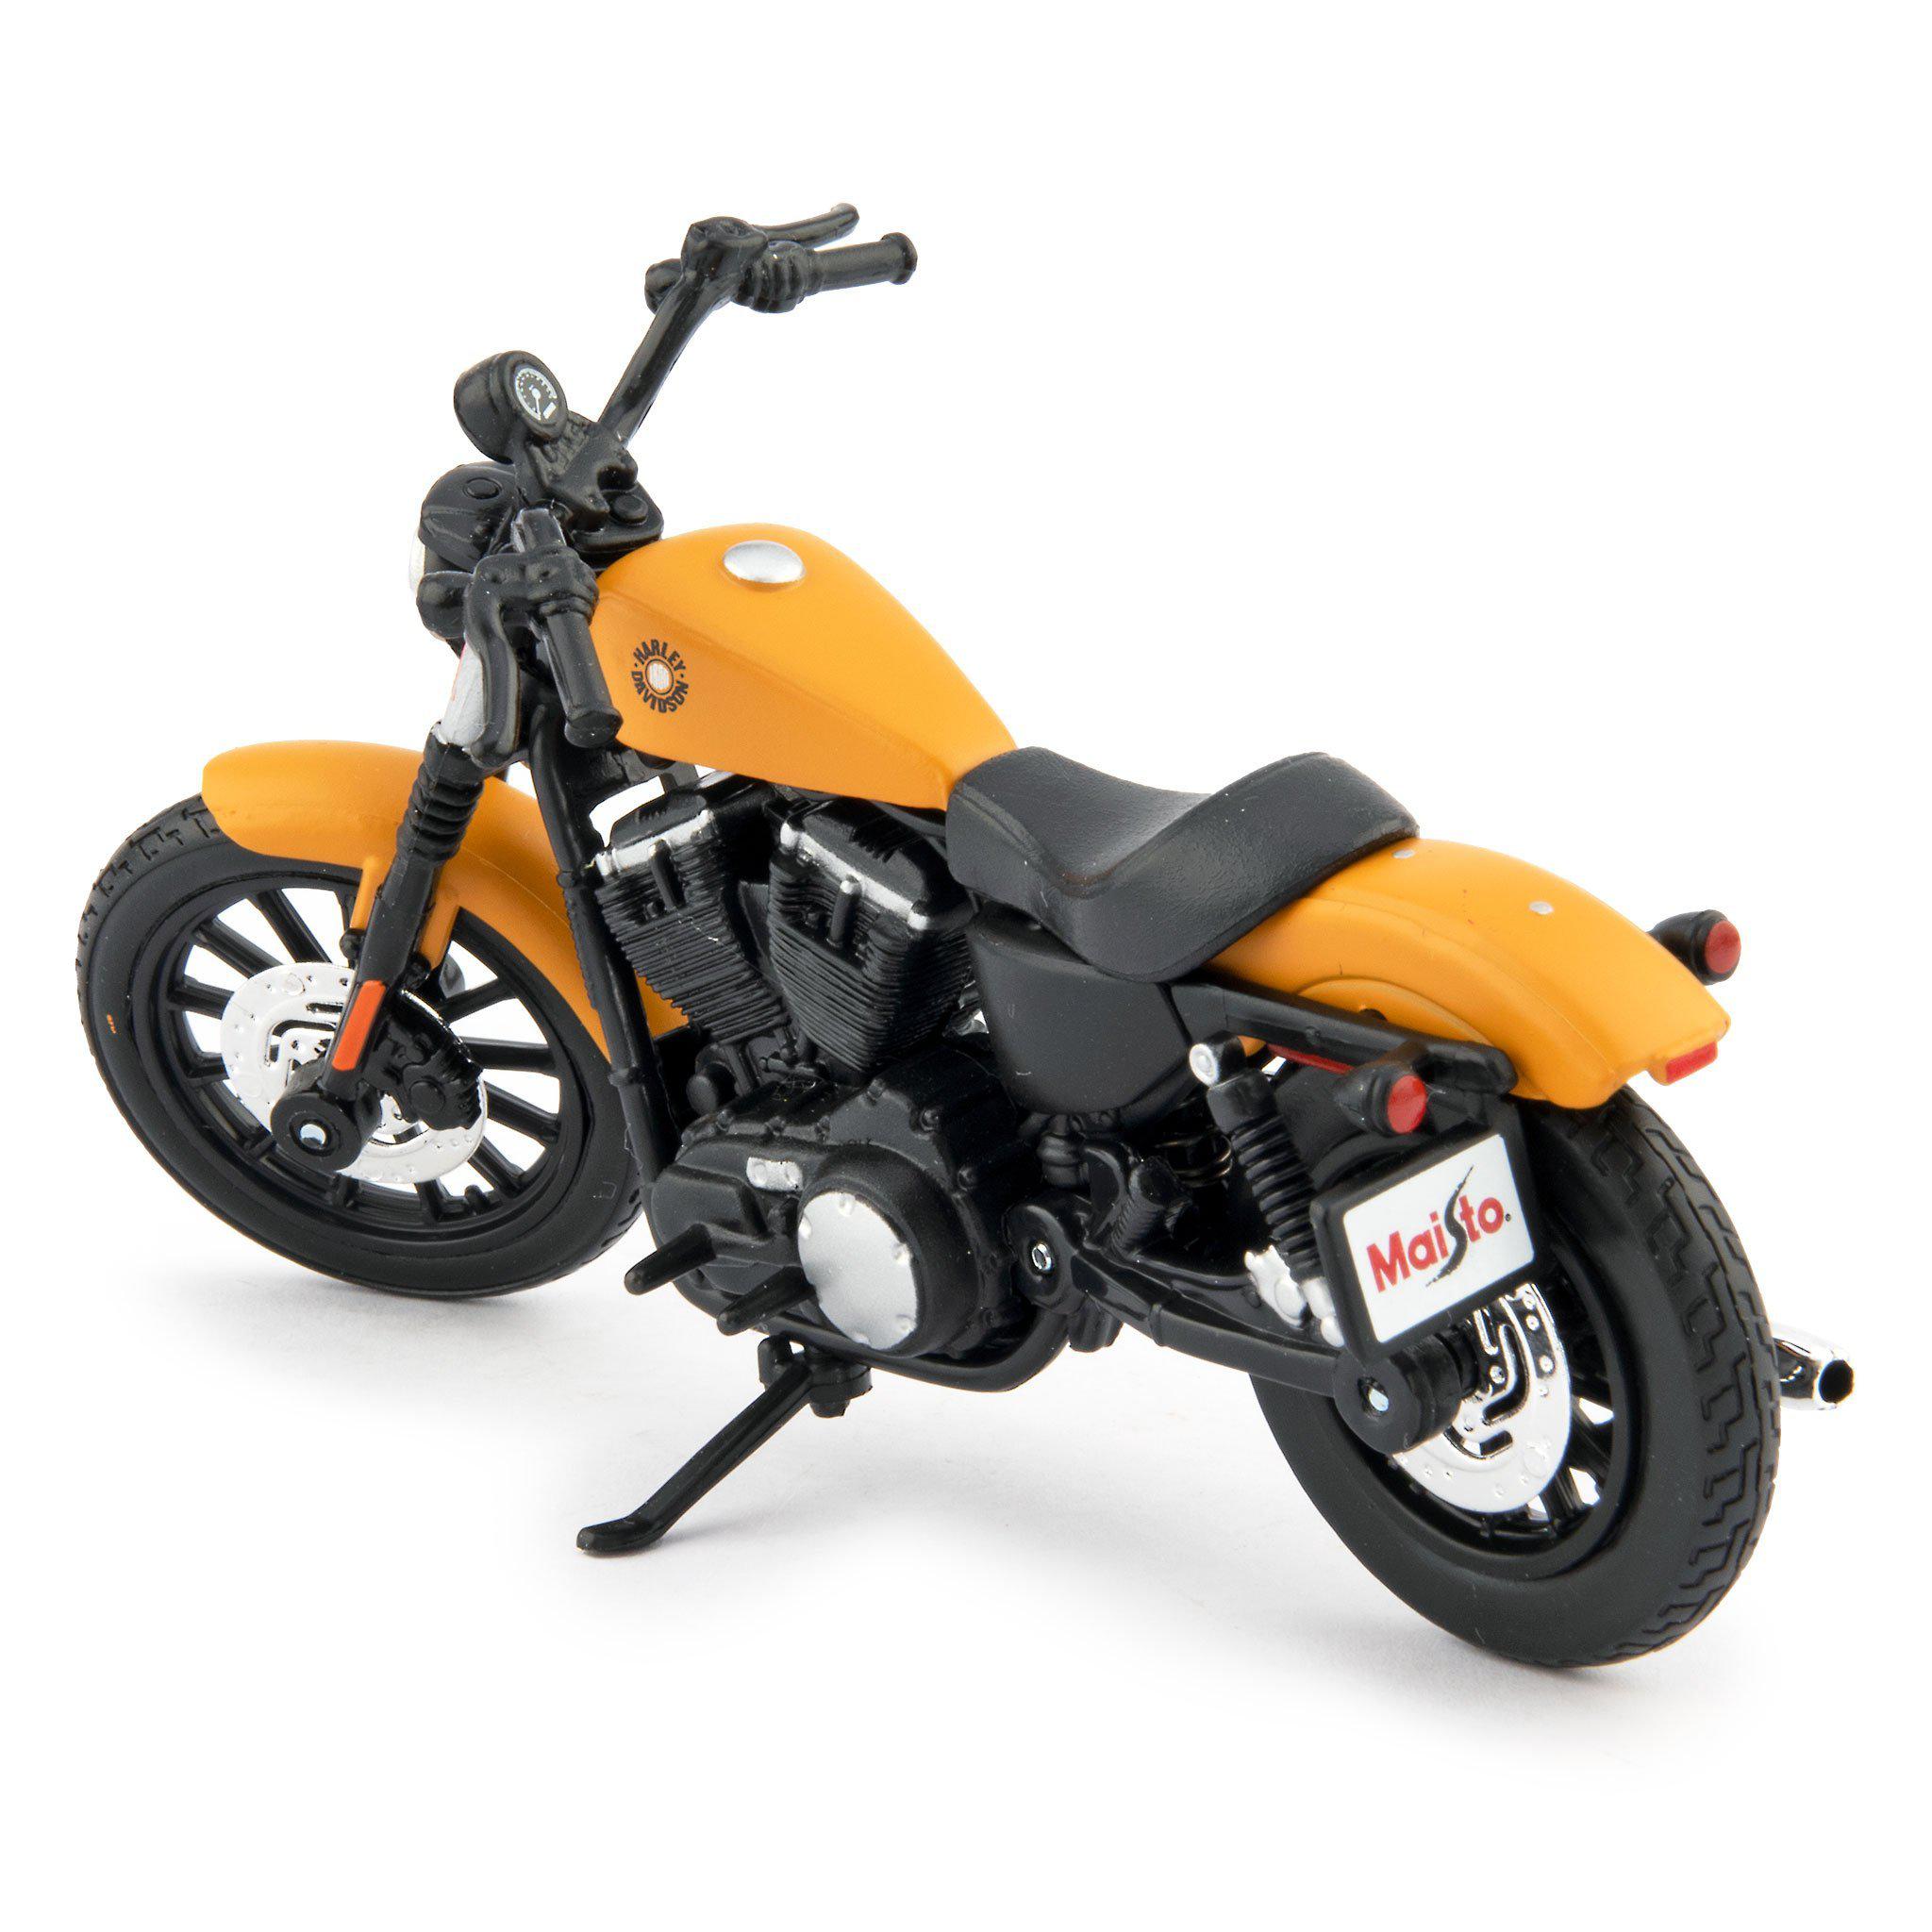 Harley-Davidson Sportster Iron 883 Diecast Model Motorcycle 2014 yellow- 1:18 scale-Maisto-Diecast Model Centre